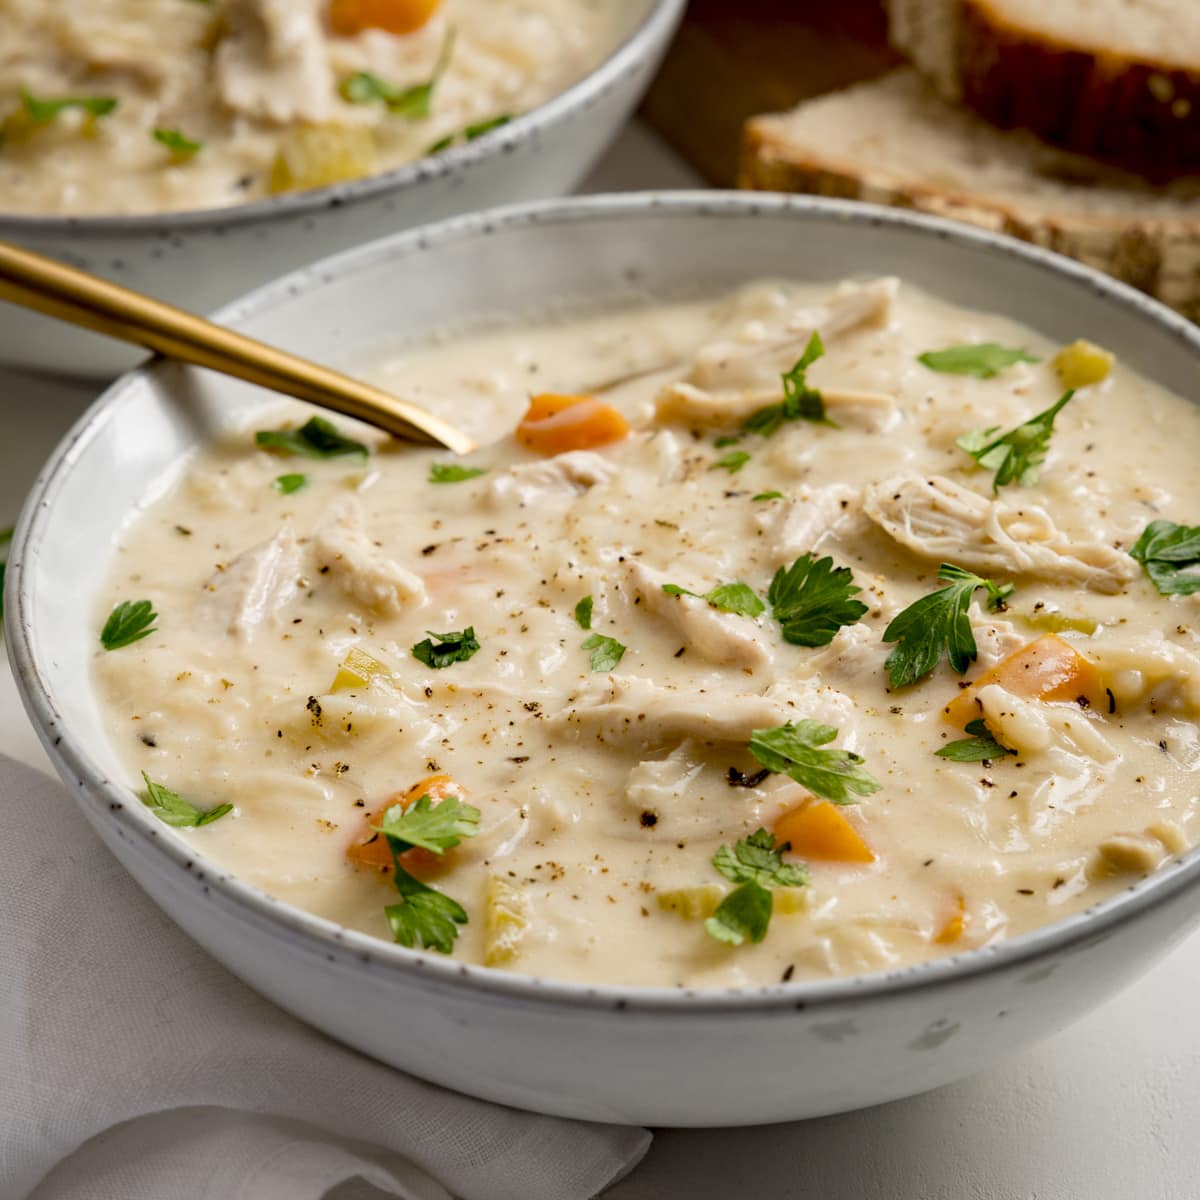 https://www.kitchensanctuary.com/wp-content/uploads/2023/01/Chicken-and-rice-soup-square-FS-22.jpg